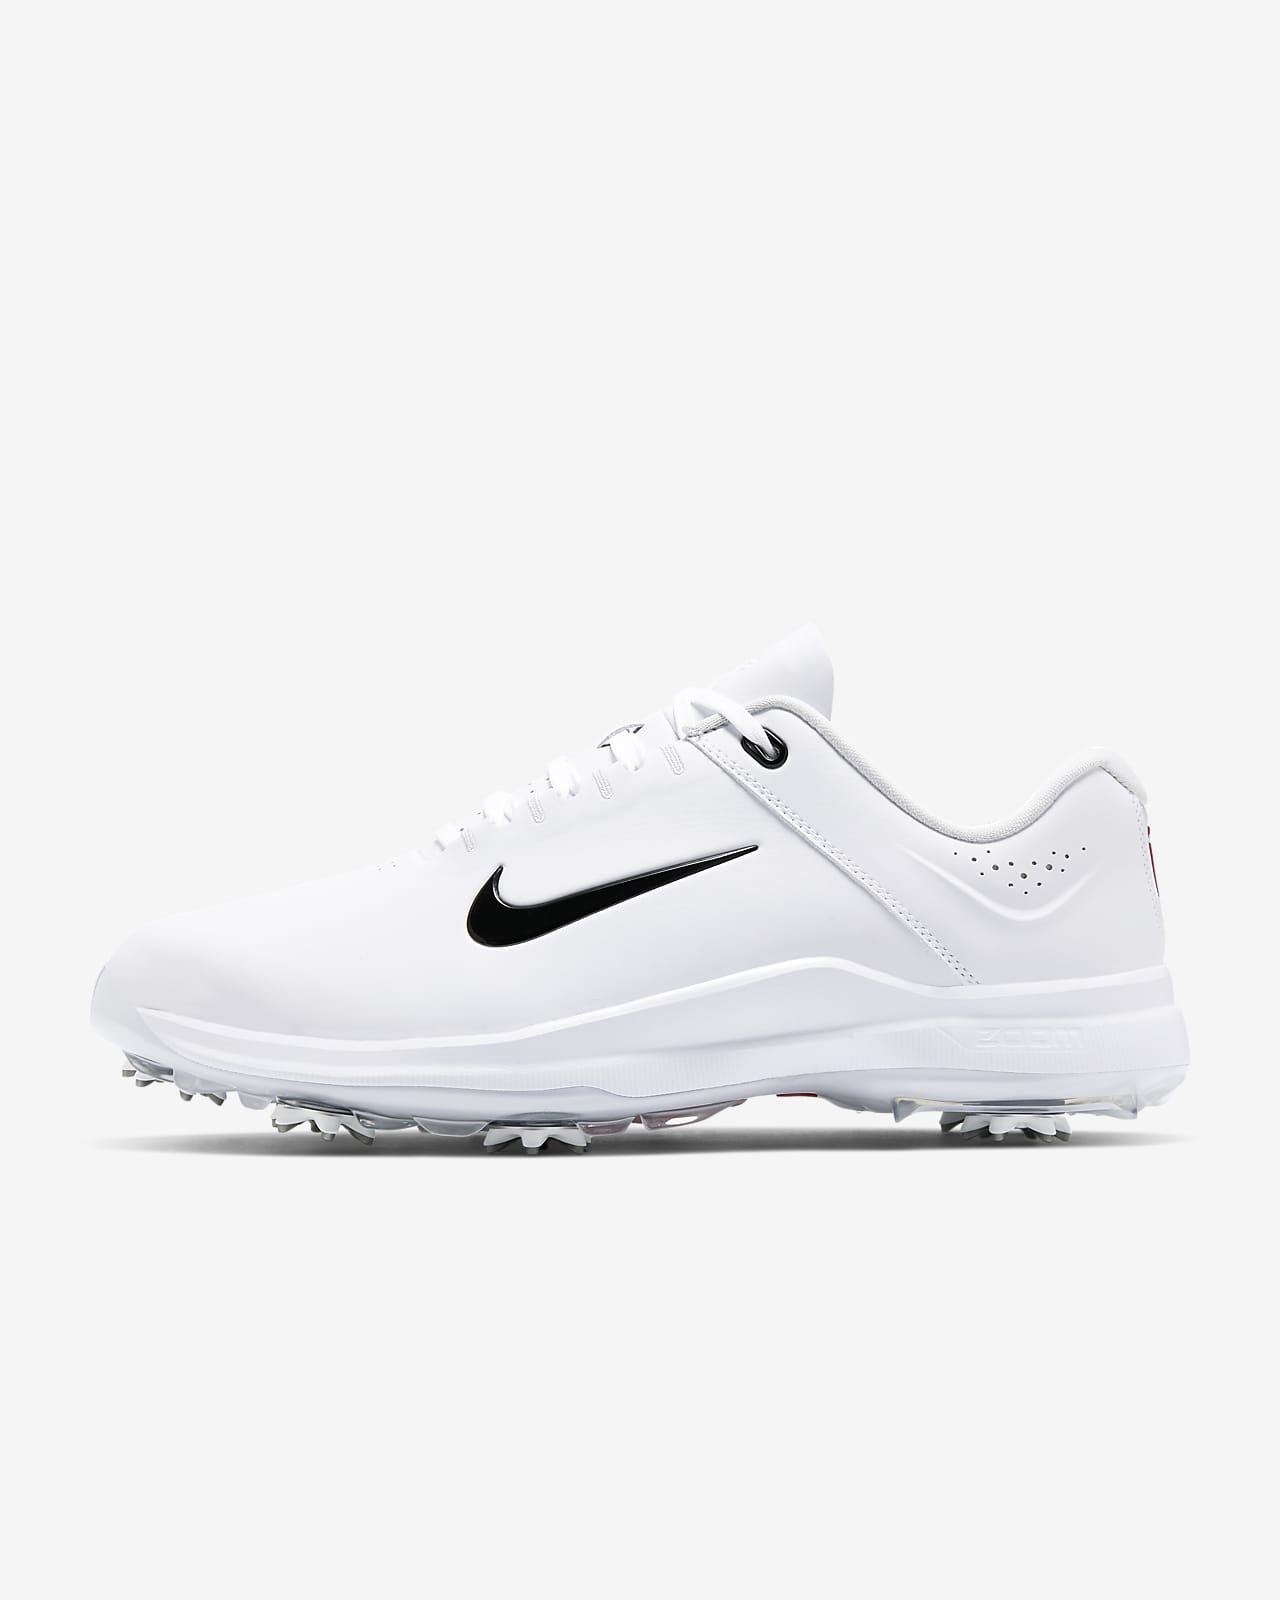 tiger woods nike shoes